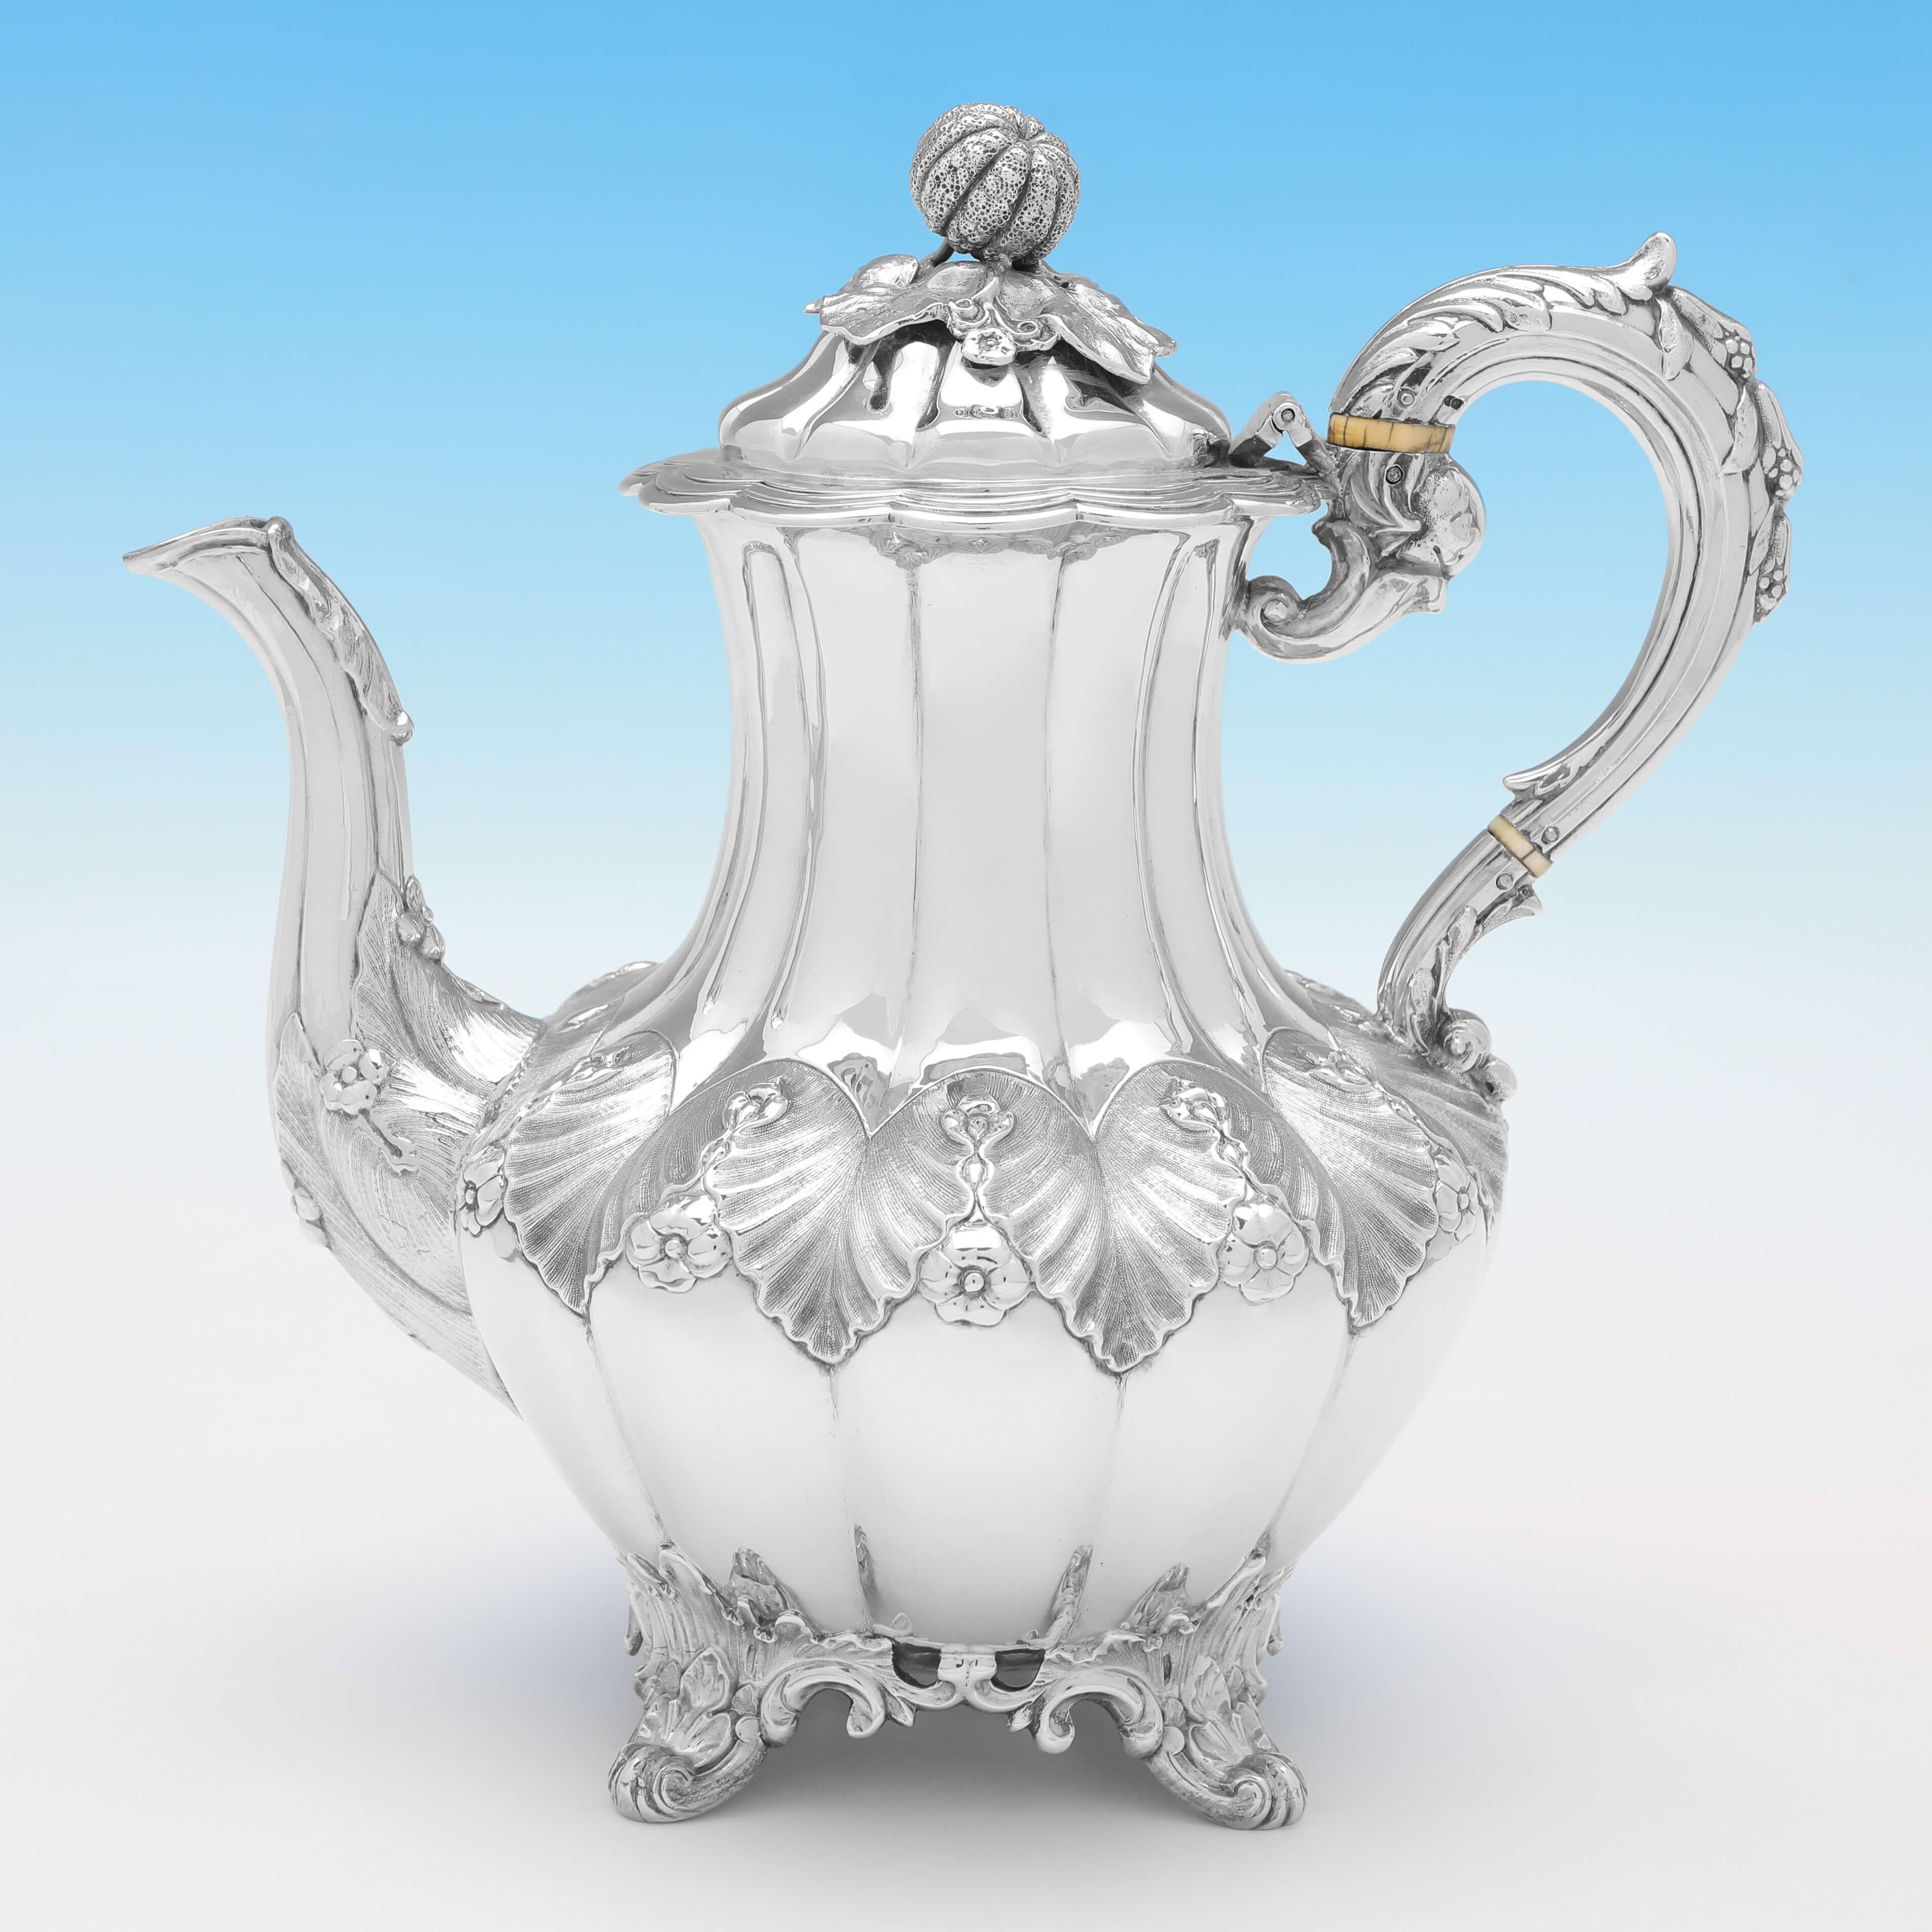 Hallmarked in London in 1851 by Joseph & Albert Savory, this attractive, Antique Sterling Silver Tea Set, comprises a coffee pot, teapot, cream jug and sugar bowl, all in a 'Melon' shape, with chased acanthus & rose detailing, and gilt interiors to